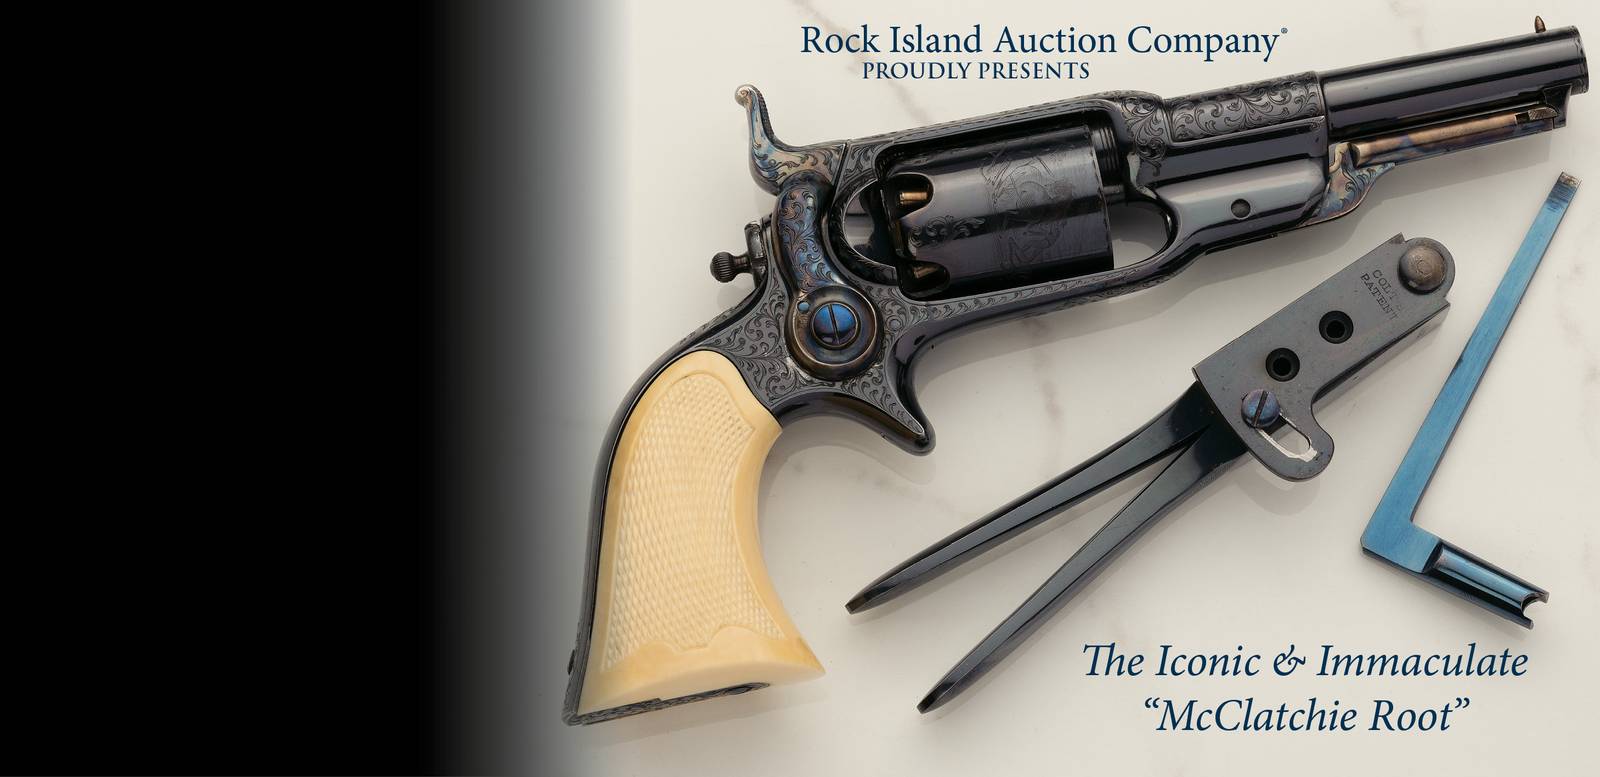 Featured in Our Next Premier Auction